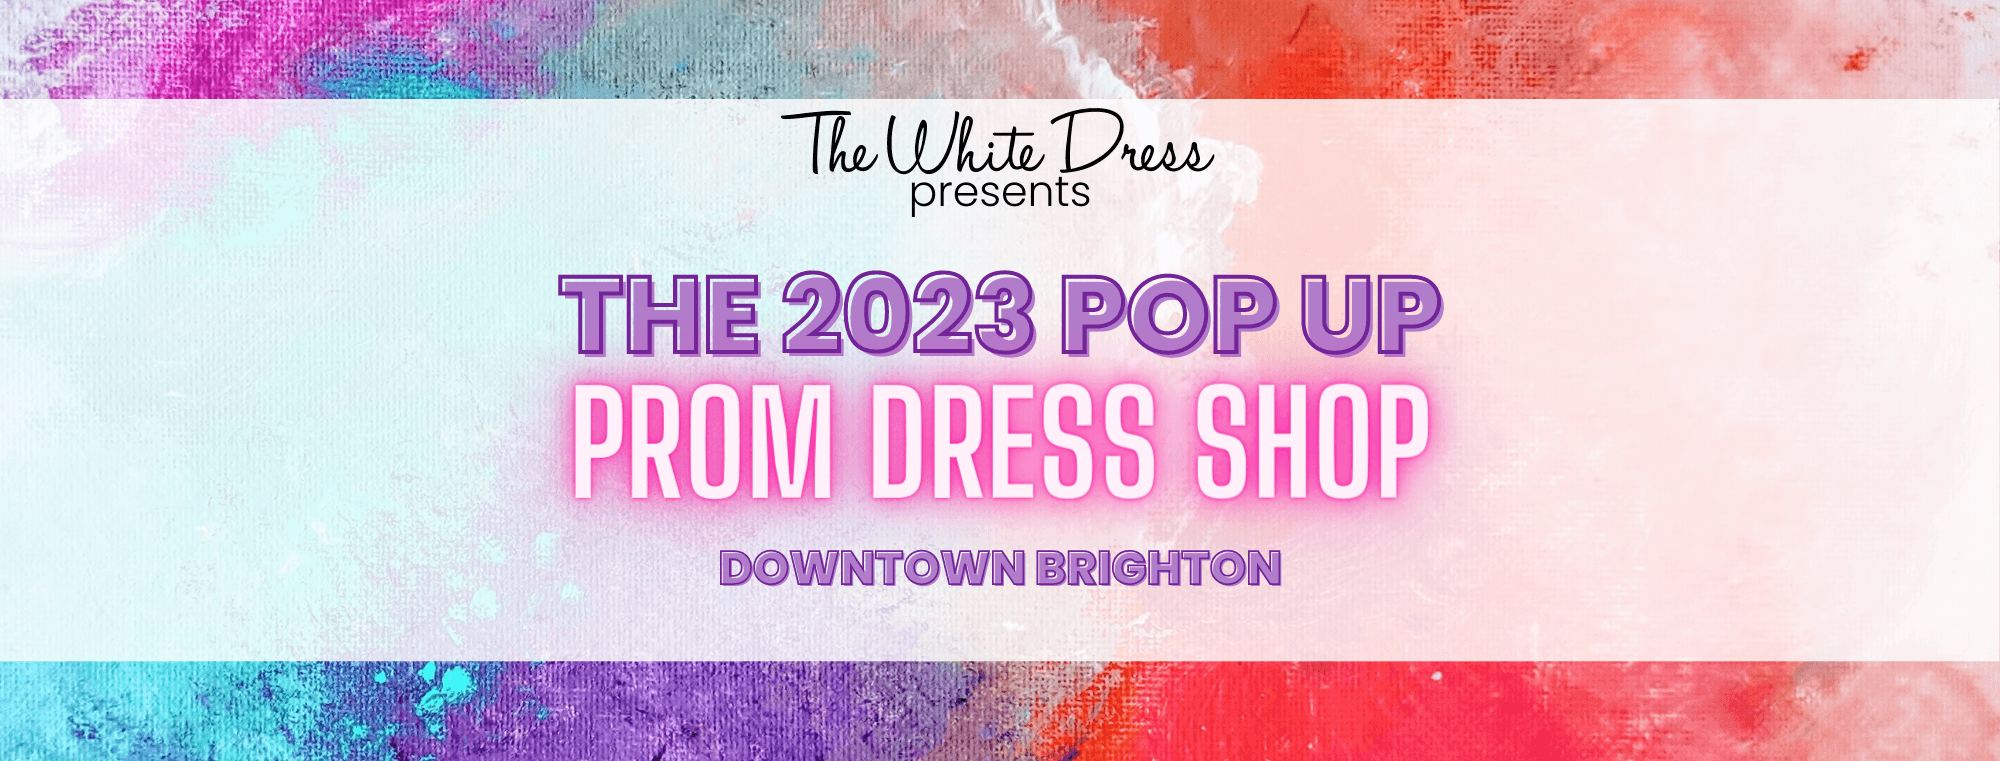 The White Dress presents the 2023 pop up prom dress shop at downtown Brighton